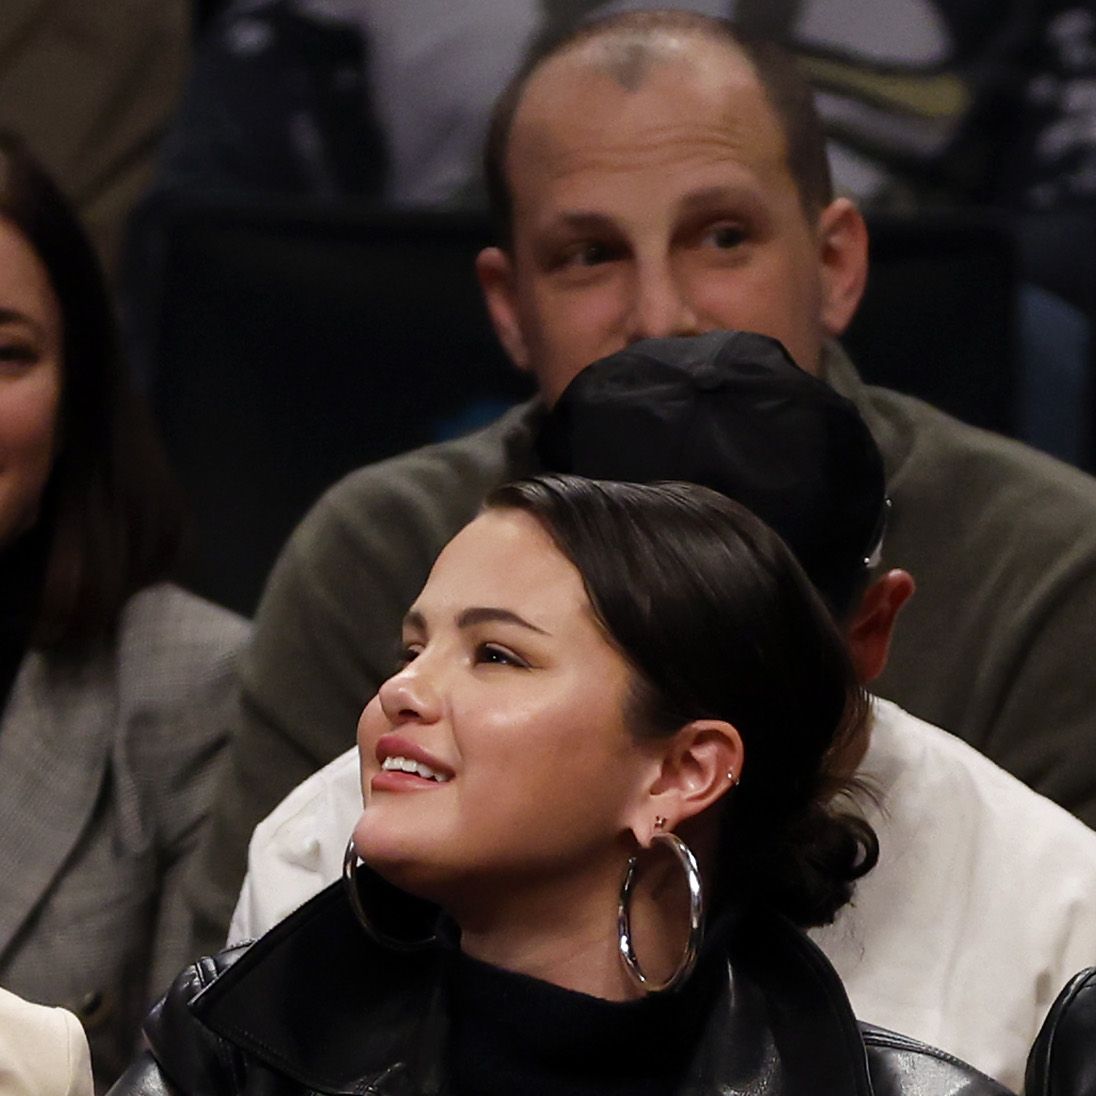 selenagomez thanks for taking me to a basketball game I appreciate